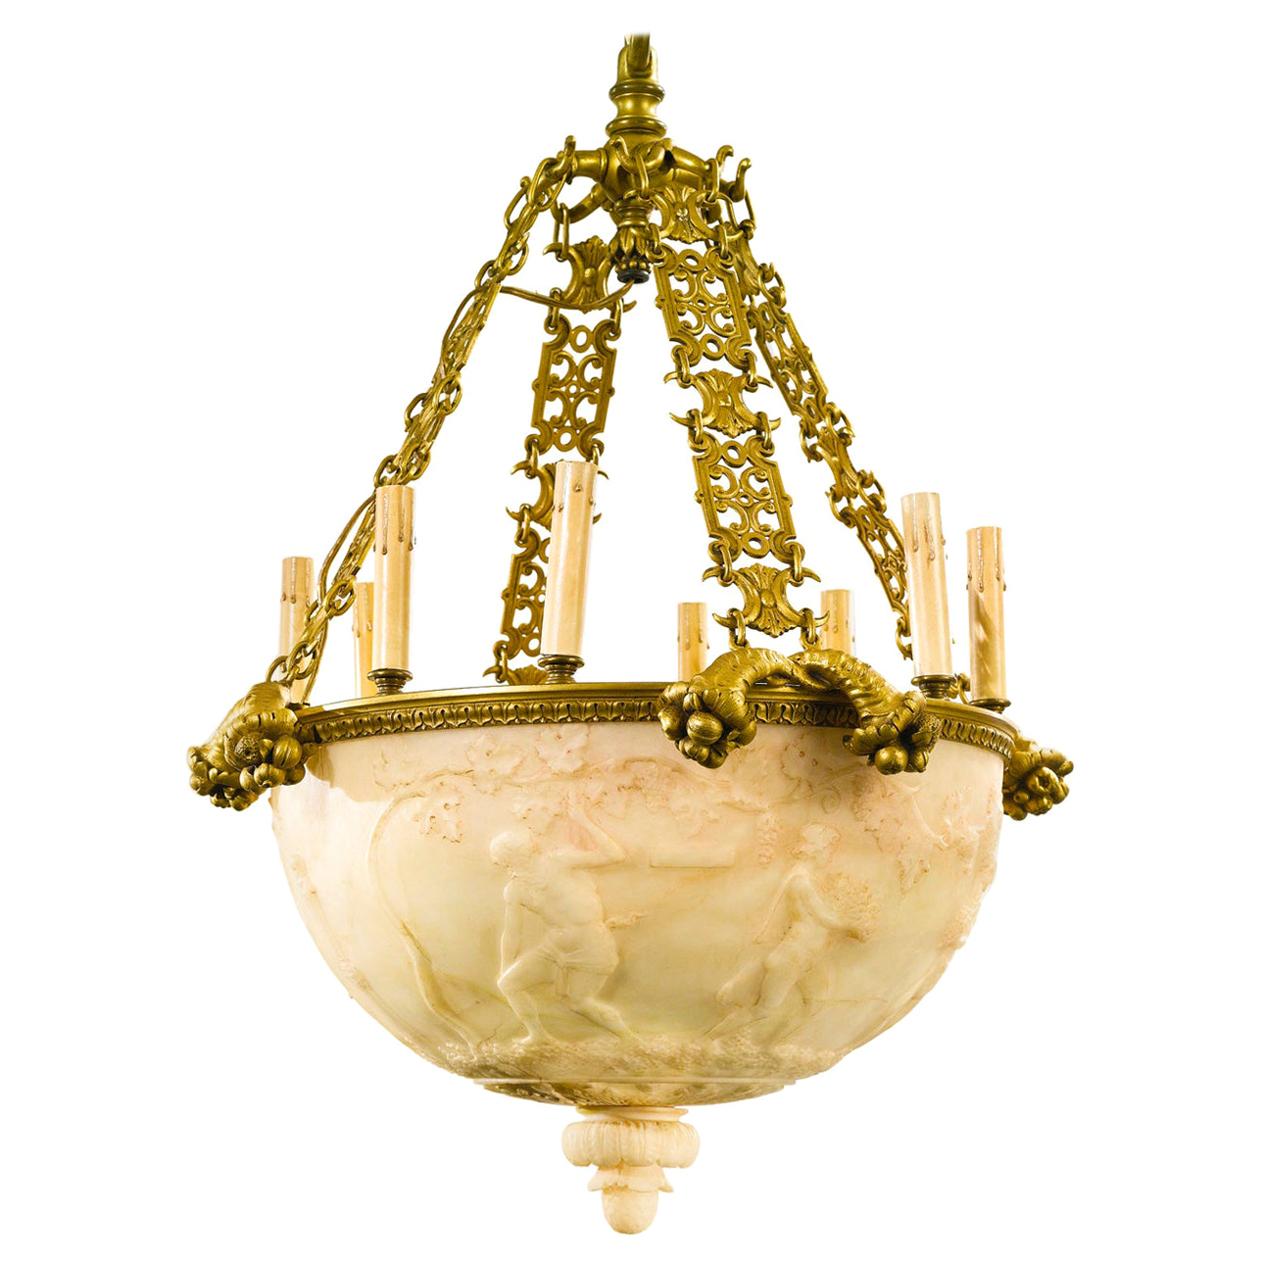 Early 20th Century Gilt-Bronze and Alabaster Chandelier by Edward F. Caldwell